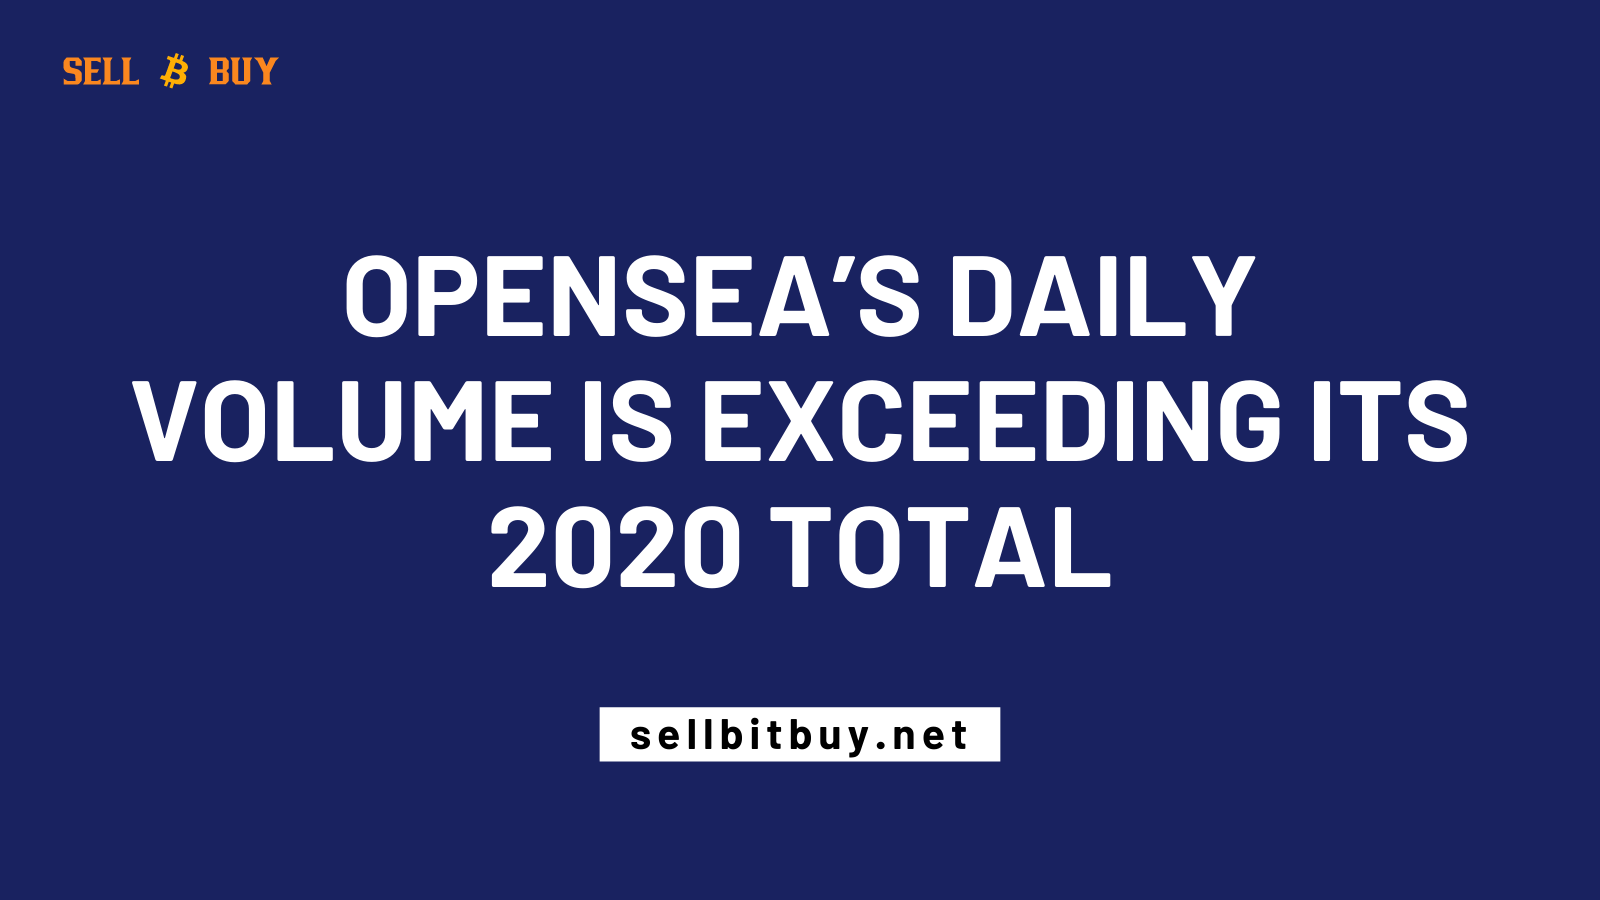 Article about OpenSea’s Daily Volume Is Exceeding Its 2020 Total